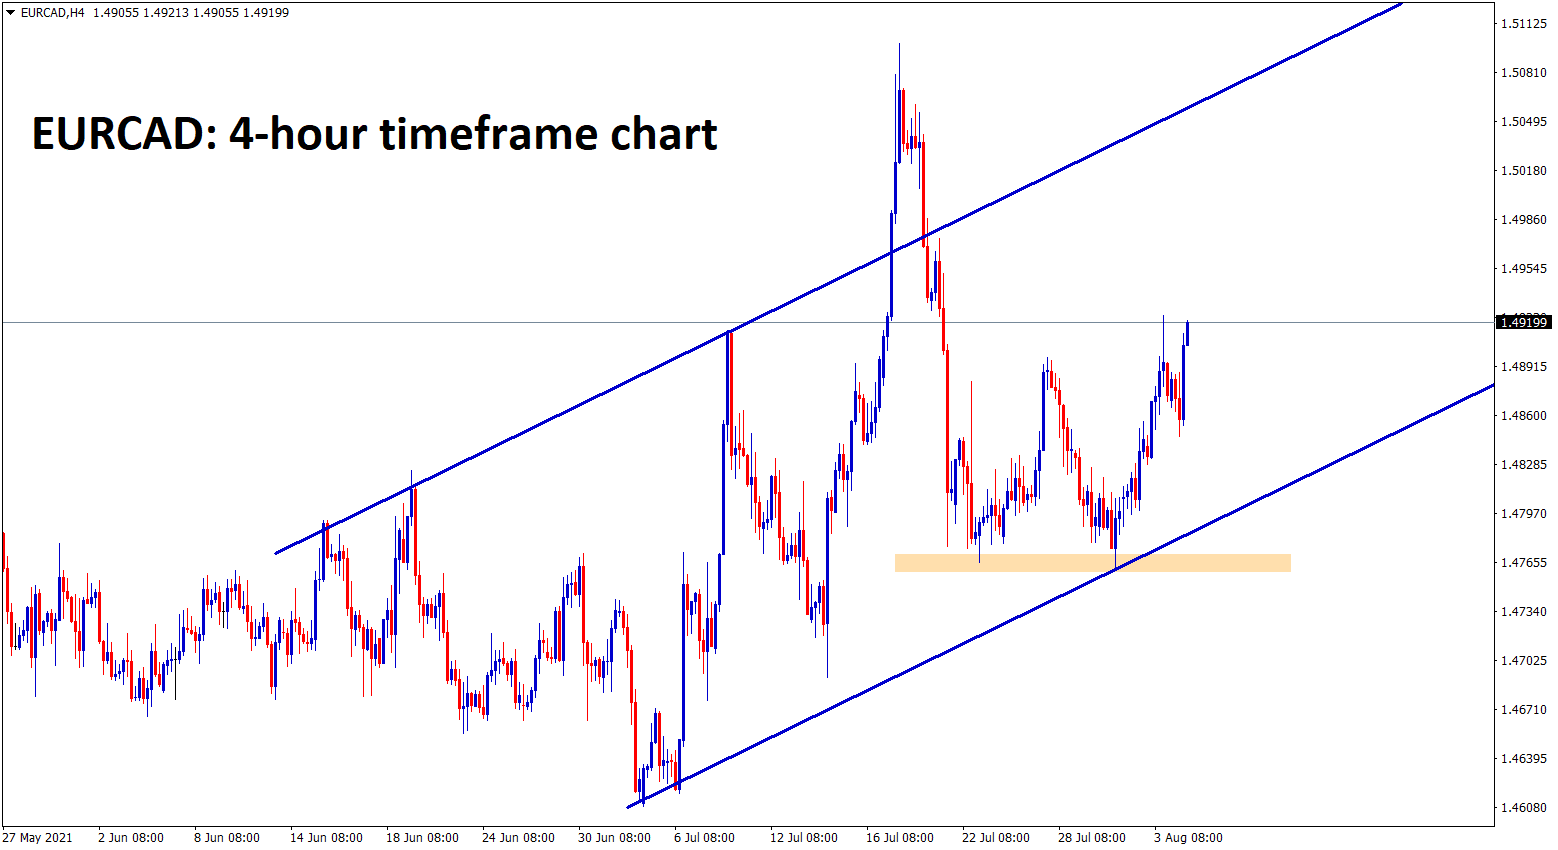 EURCAD continues to rise up in an uptrend channel range